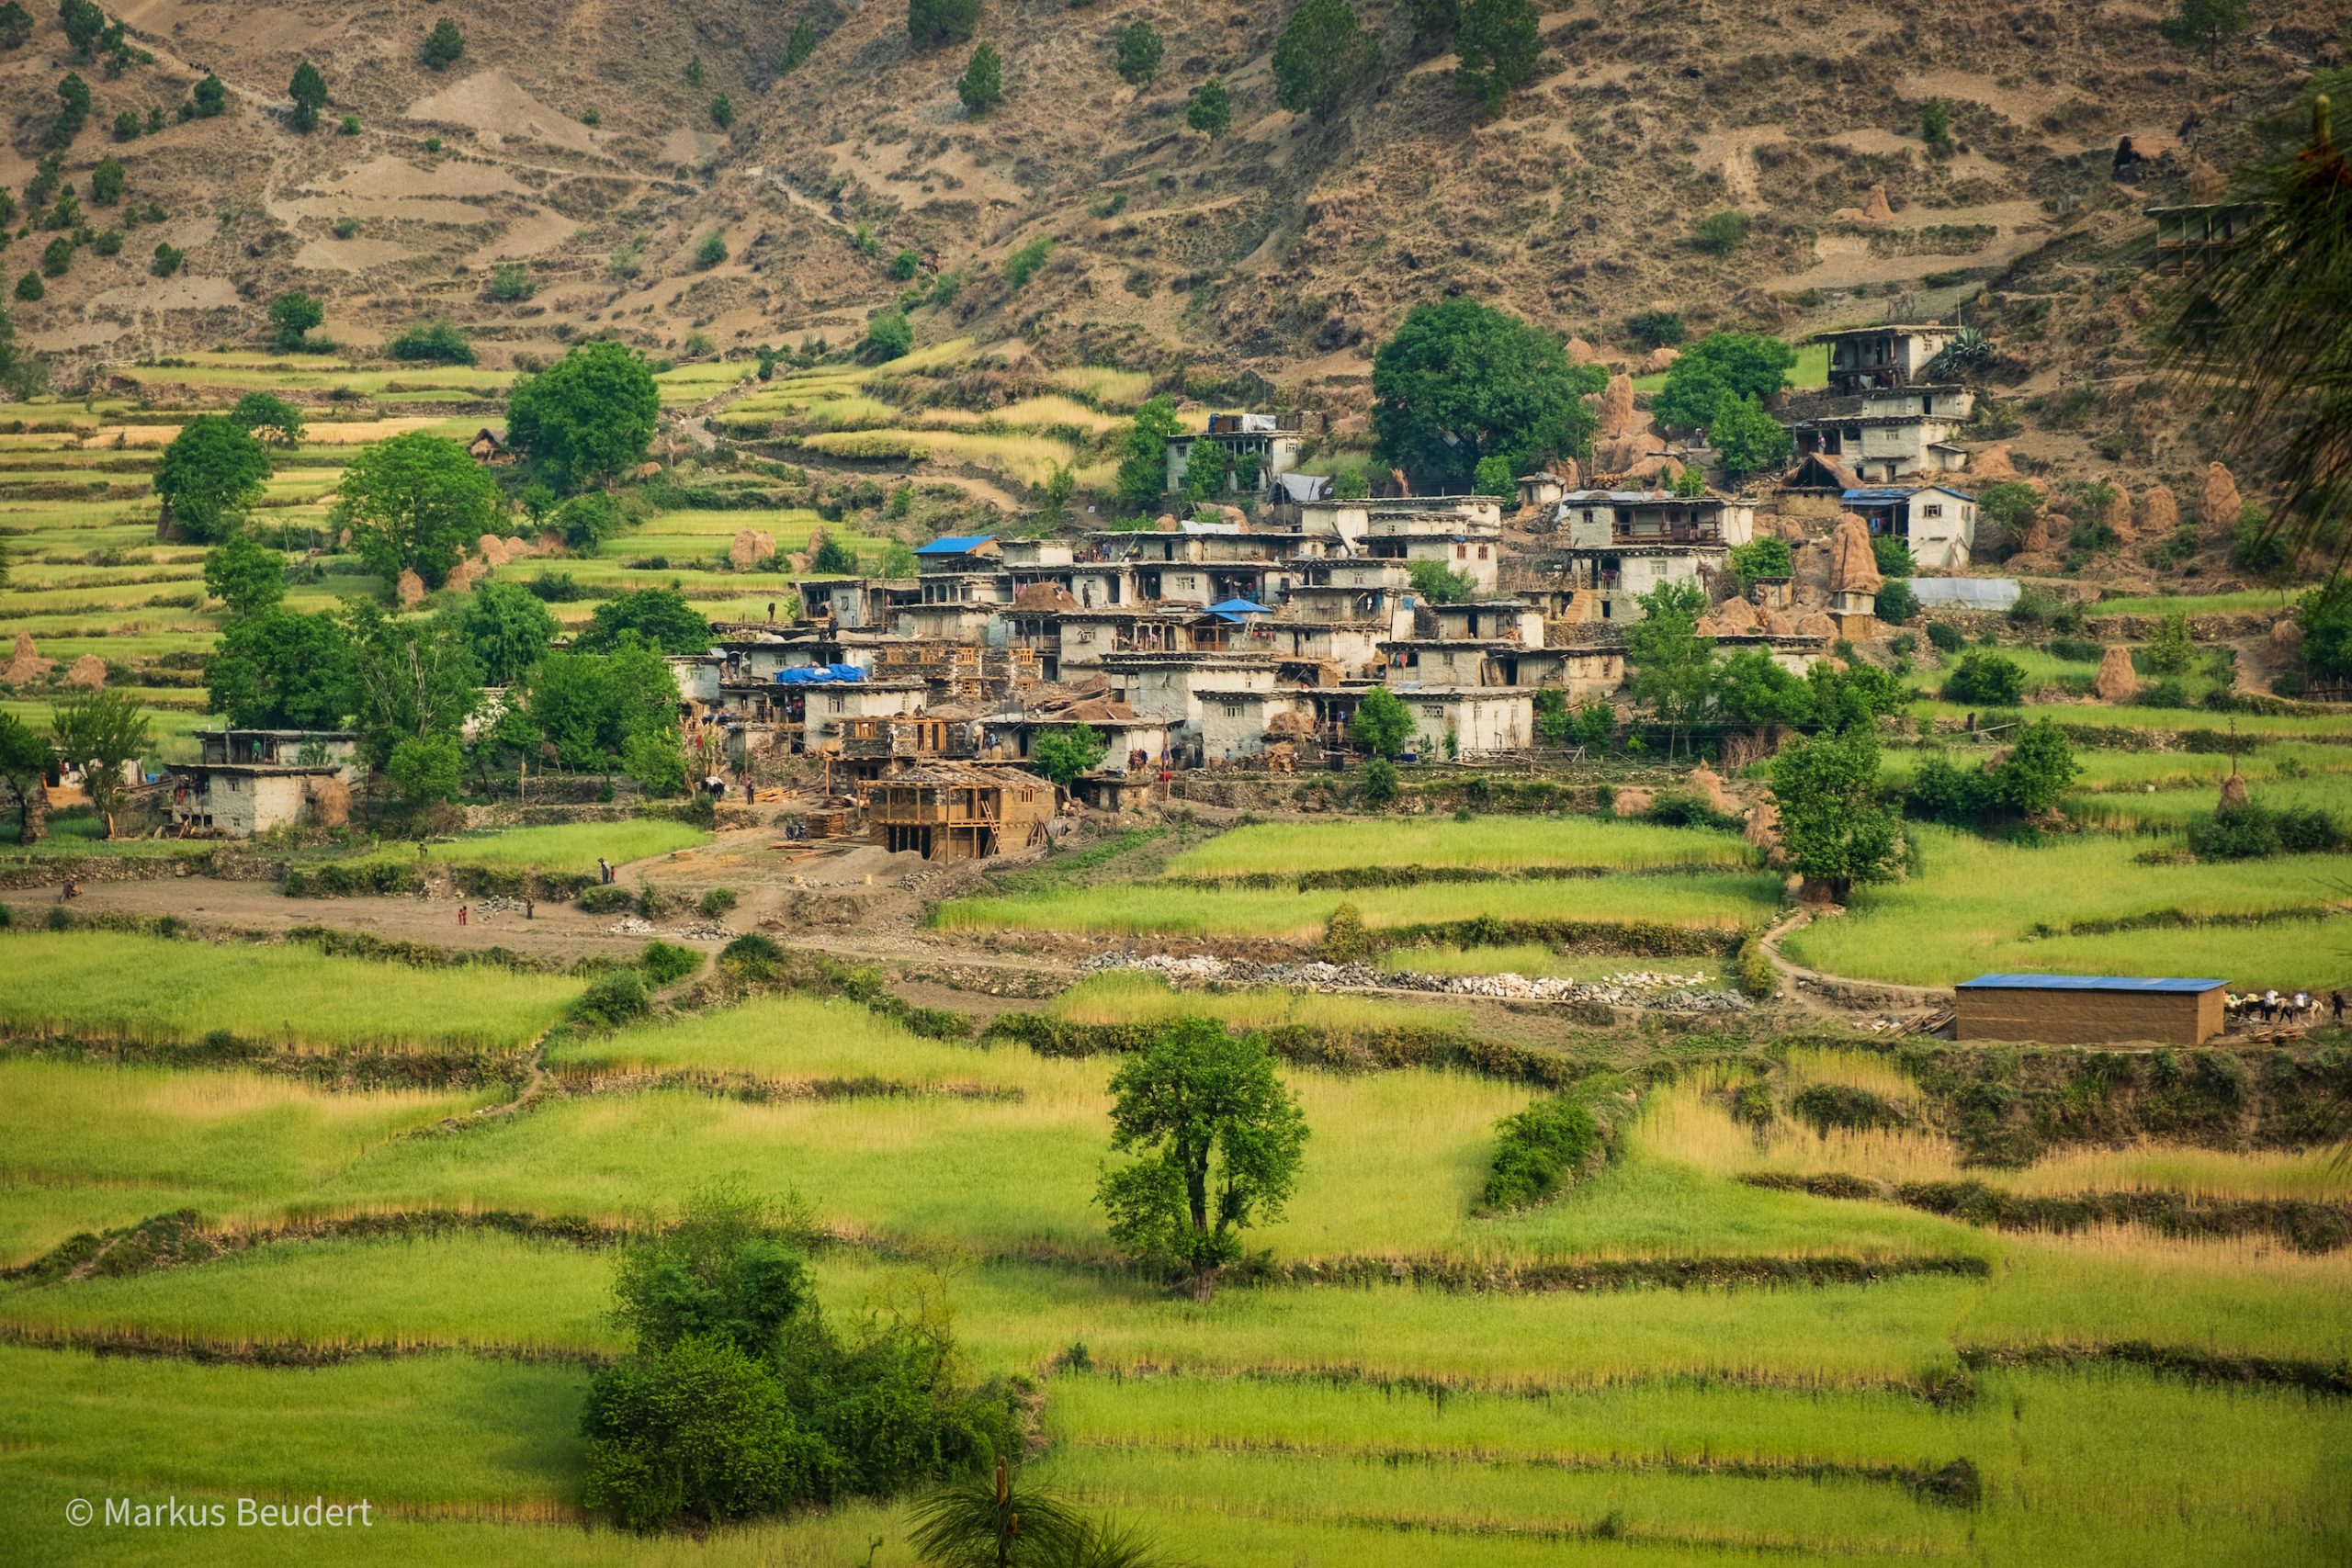 The majority of villages are populated by Hindus, mainly Chettris, Brahmins, Thakuris and occupational castes, particularly in the southern part of the district , Humla